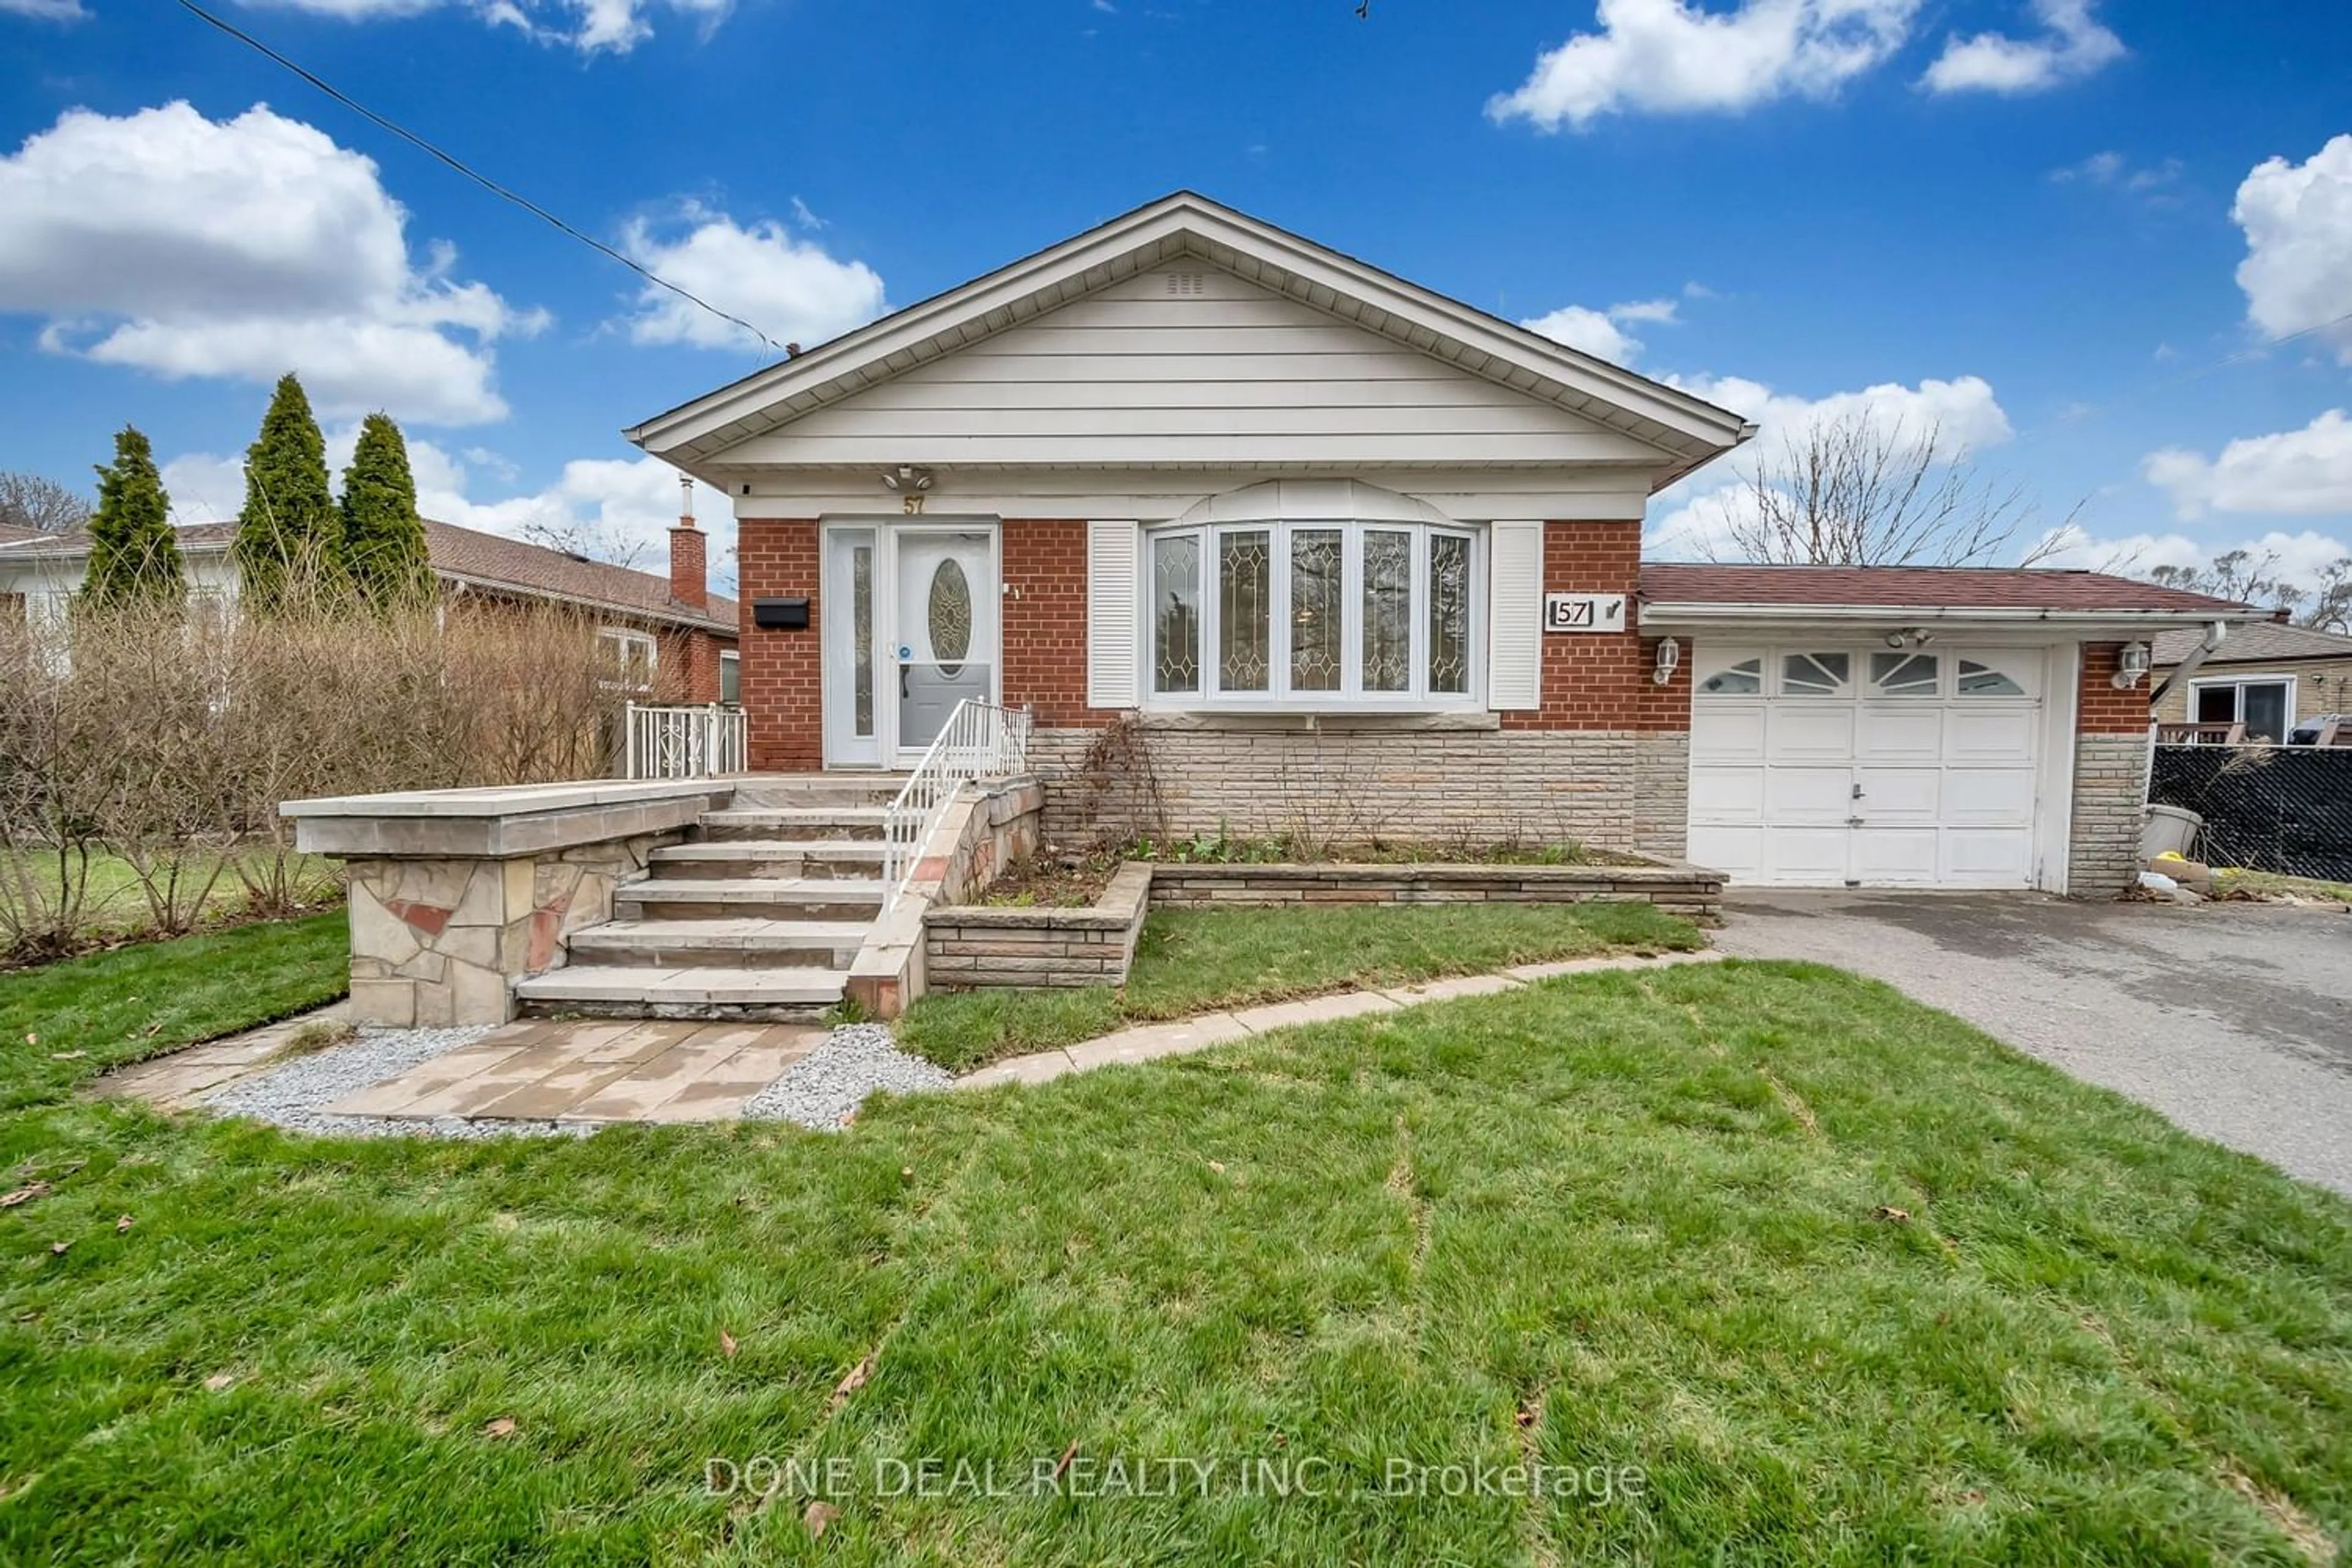 Frontside or backside of a home for 57 Blakemanor Blvd, Toronto Ontario M1J 2W6